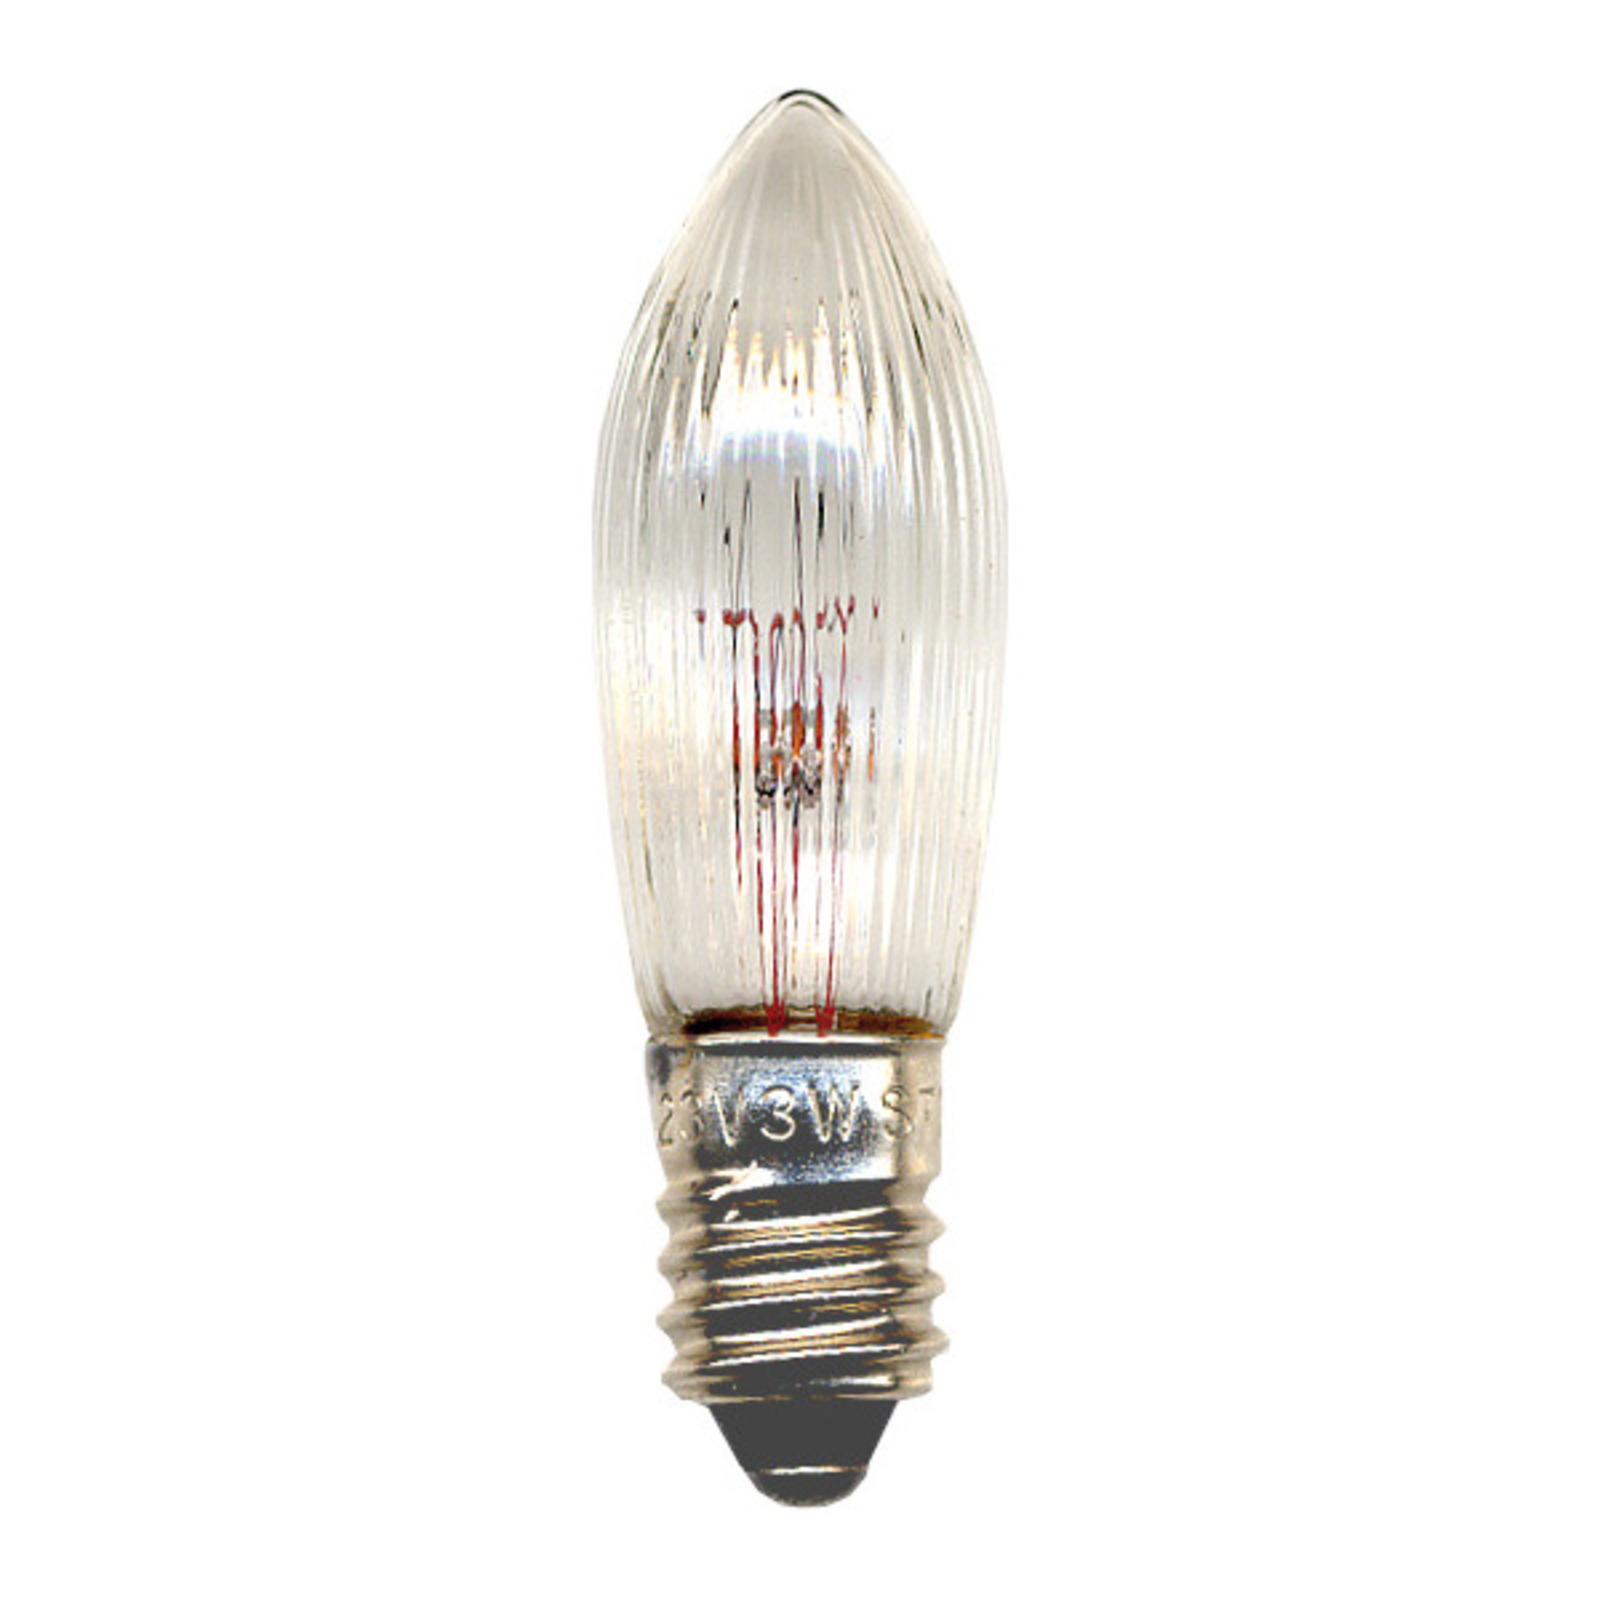 Replacement bulb E10 3 W 3-pack